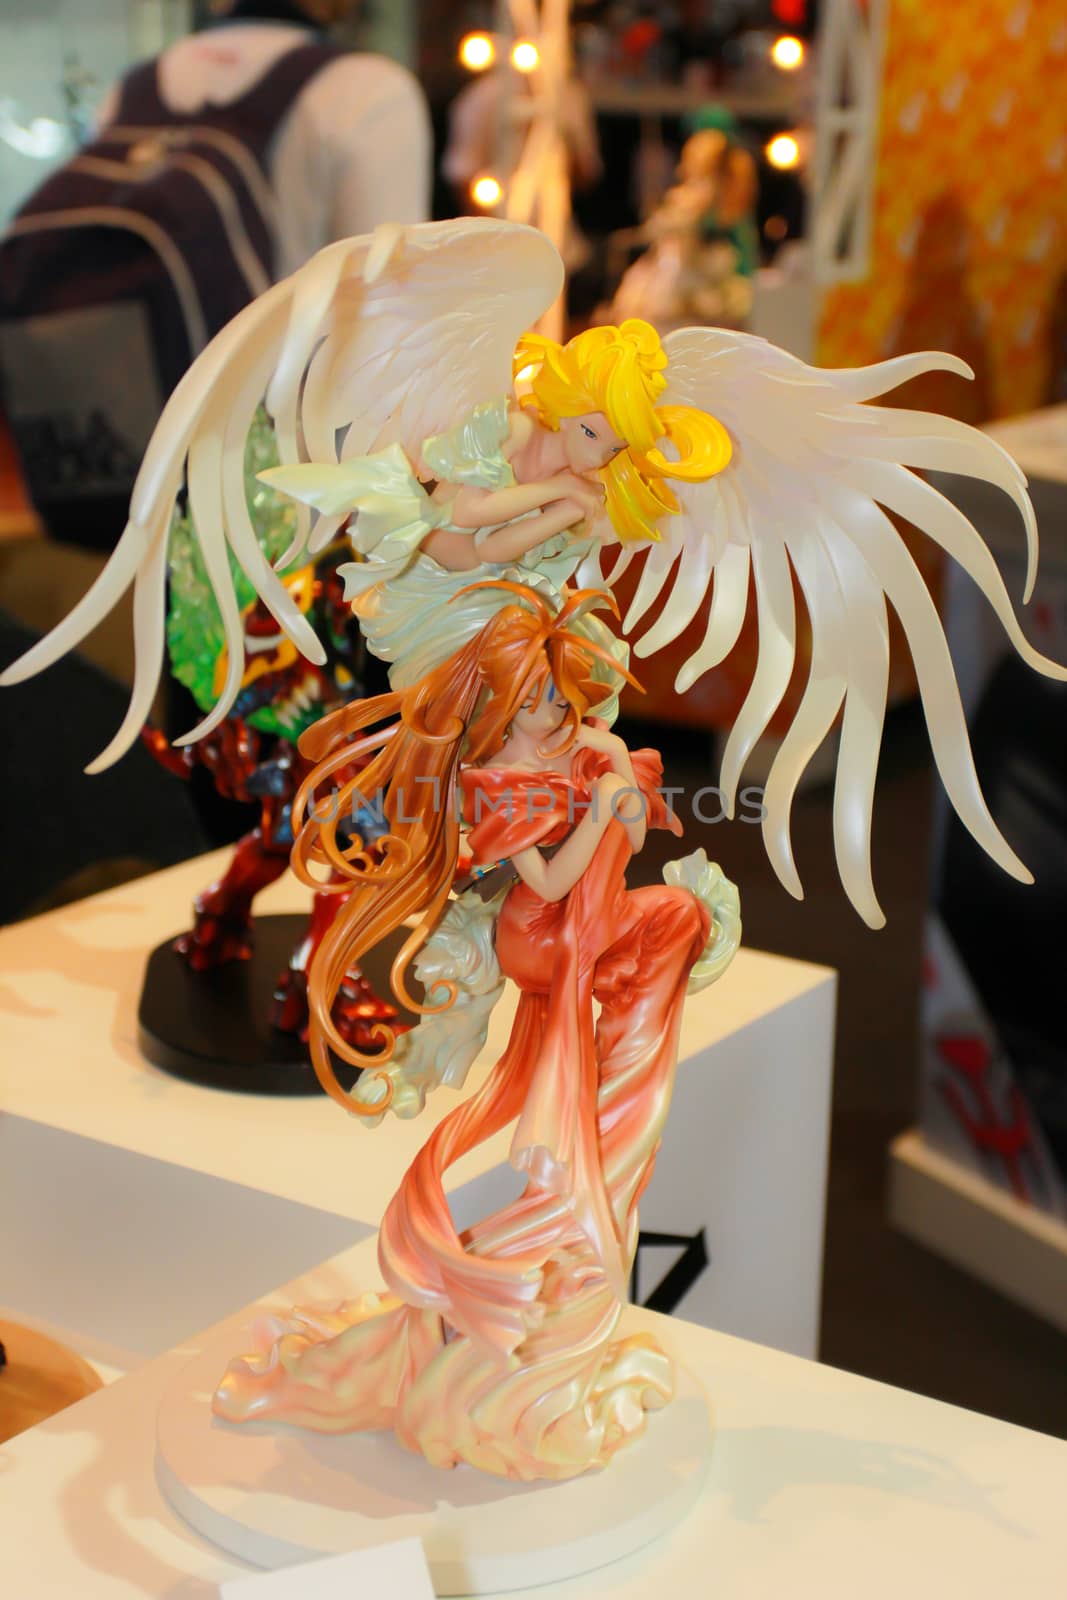 A model of the character Oh My Goddess from the comics  by redthirteen